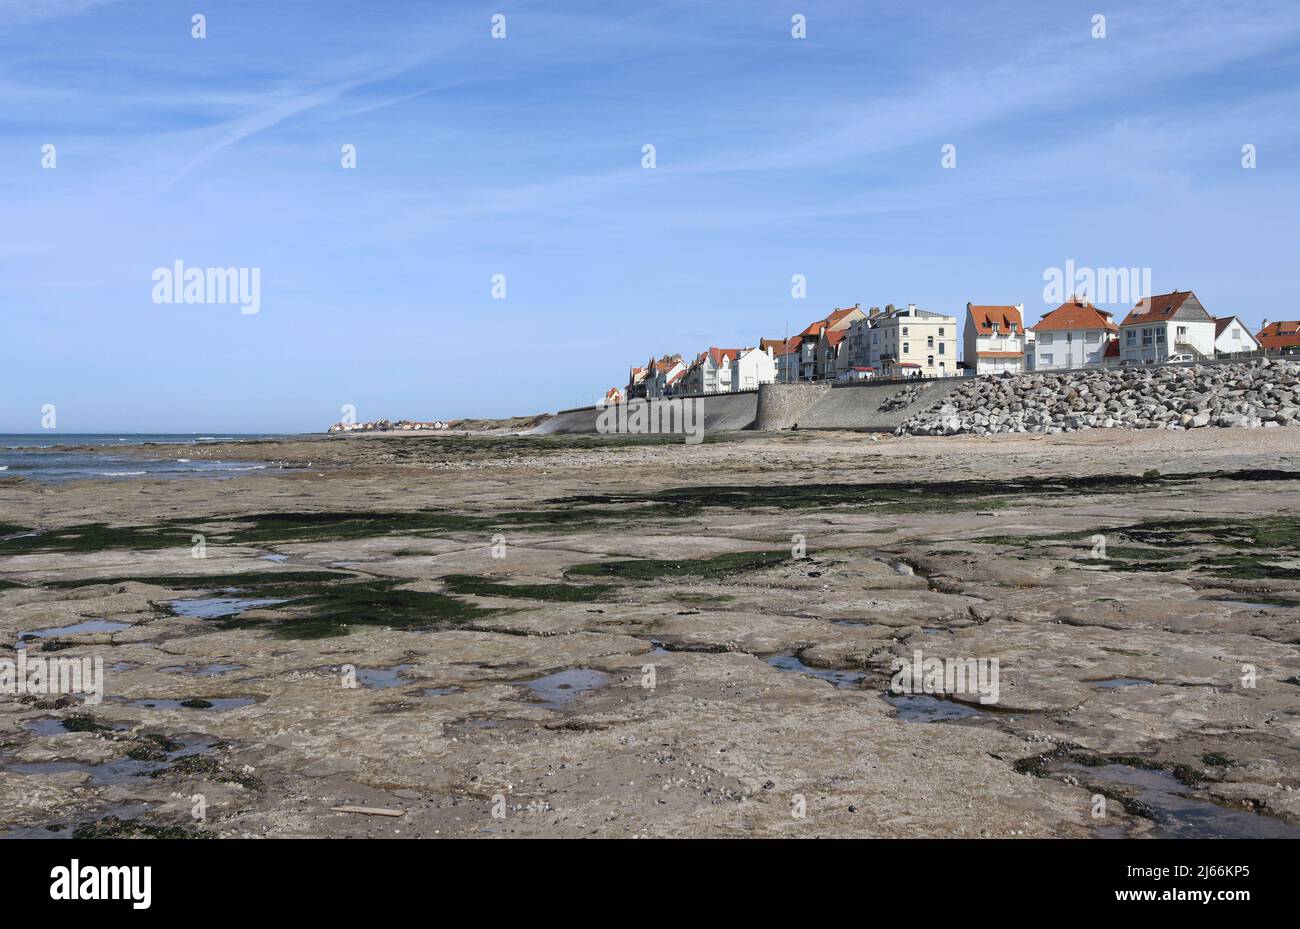 View of the resort town of Ambleteuse, from the beach on the beautiful Opal Coast of Northern France. Sunny spring day, with low tide and blue sky. Stock Photo